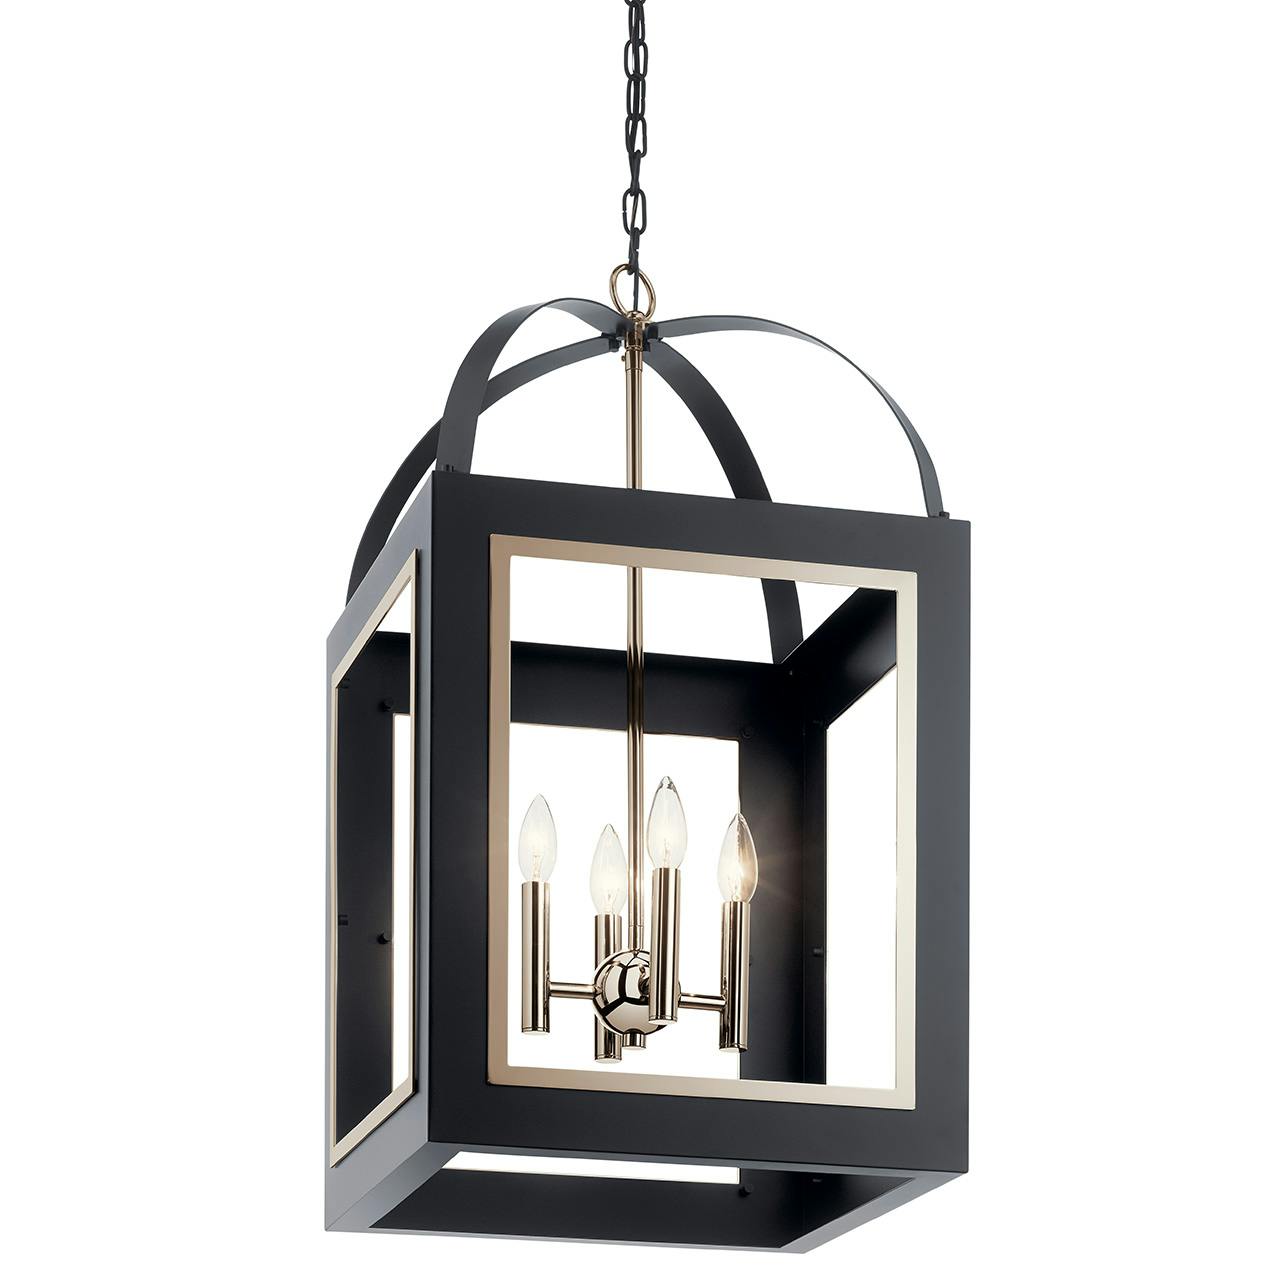 Vath™ 16" 4 Light Foyer Pendant Black without the canopy on a white background